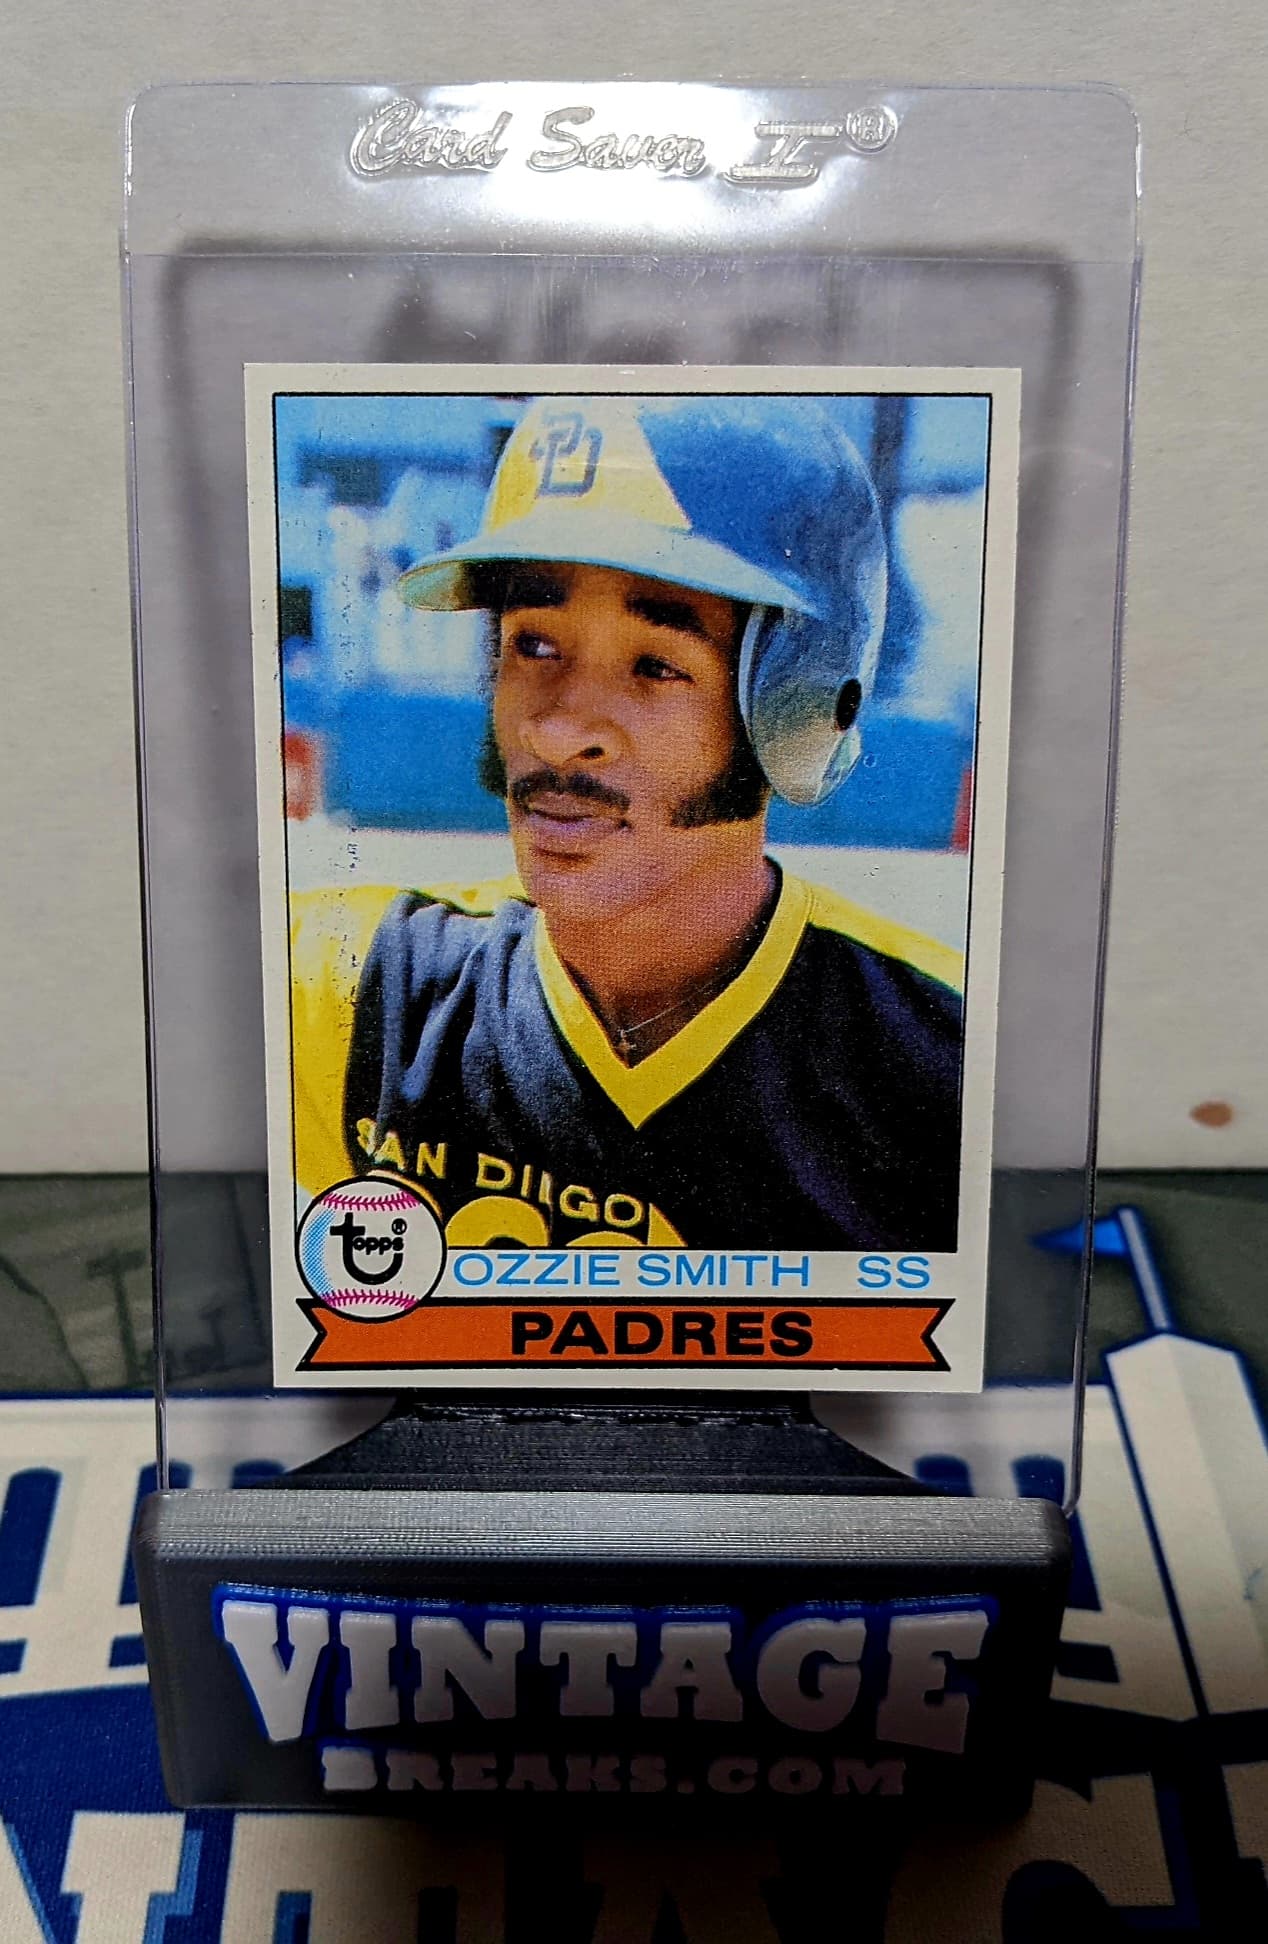 Ozzie Smith 1979 Topps Rookie Card Pulled by Vintage Breaks [VIDEO]